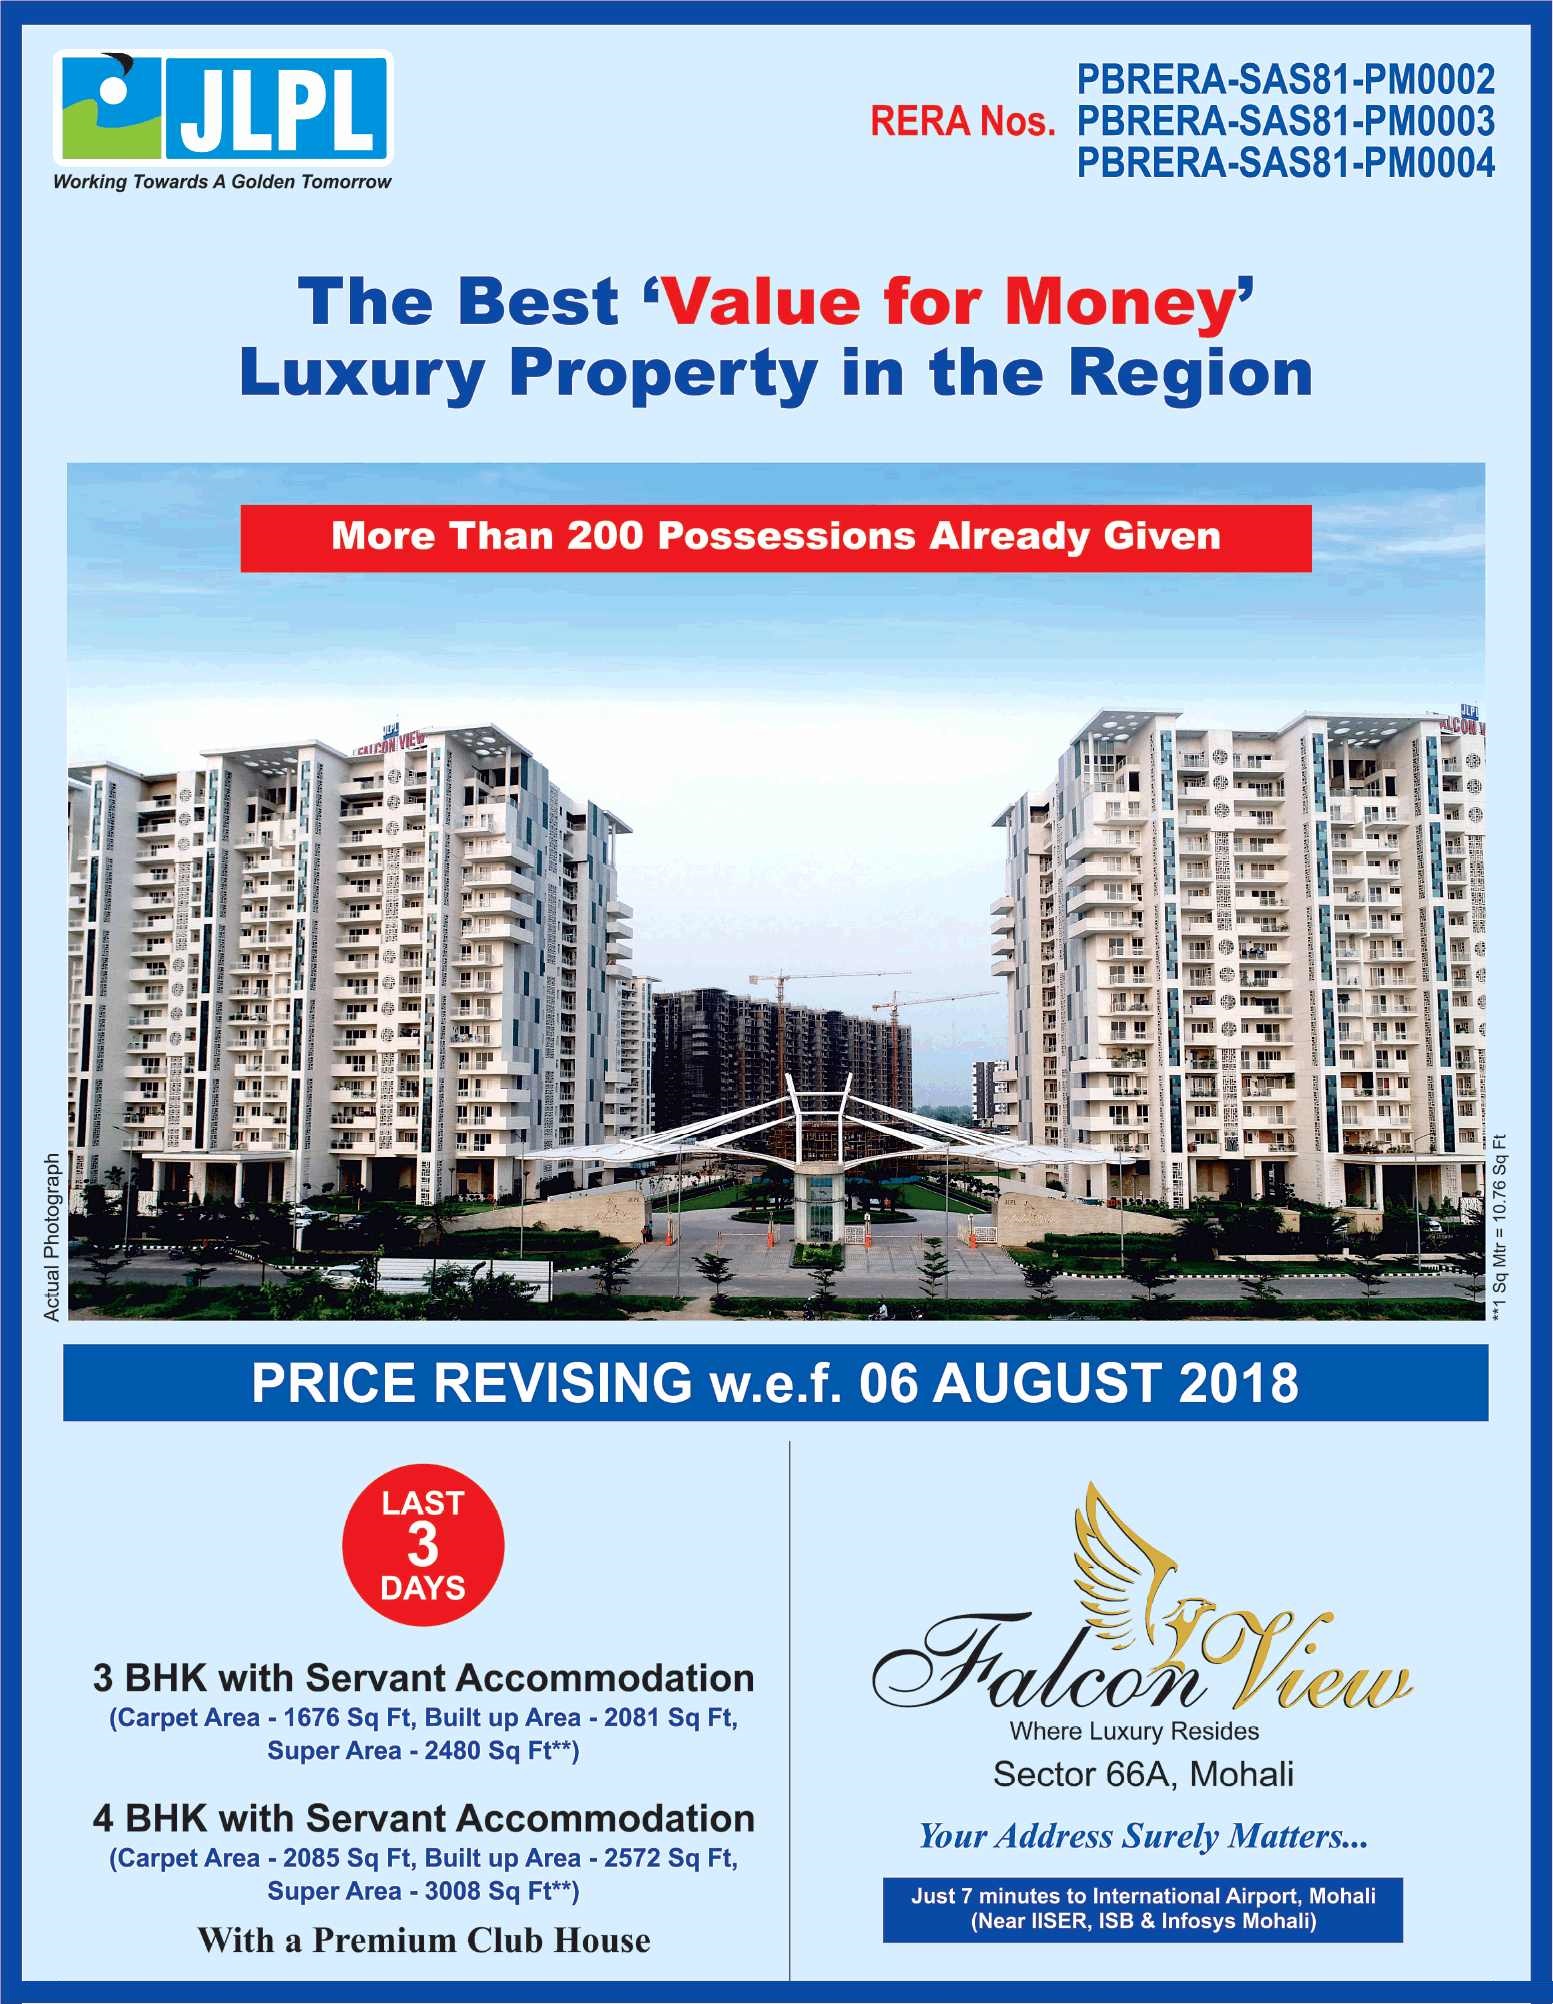 Book luxury property in the region at JLPL Falcon View in Mohali Update